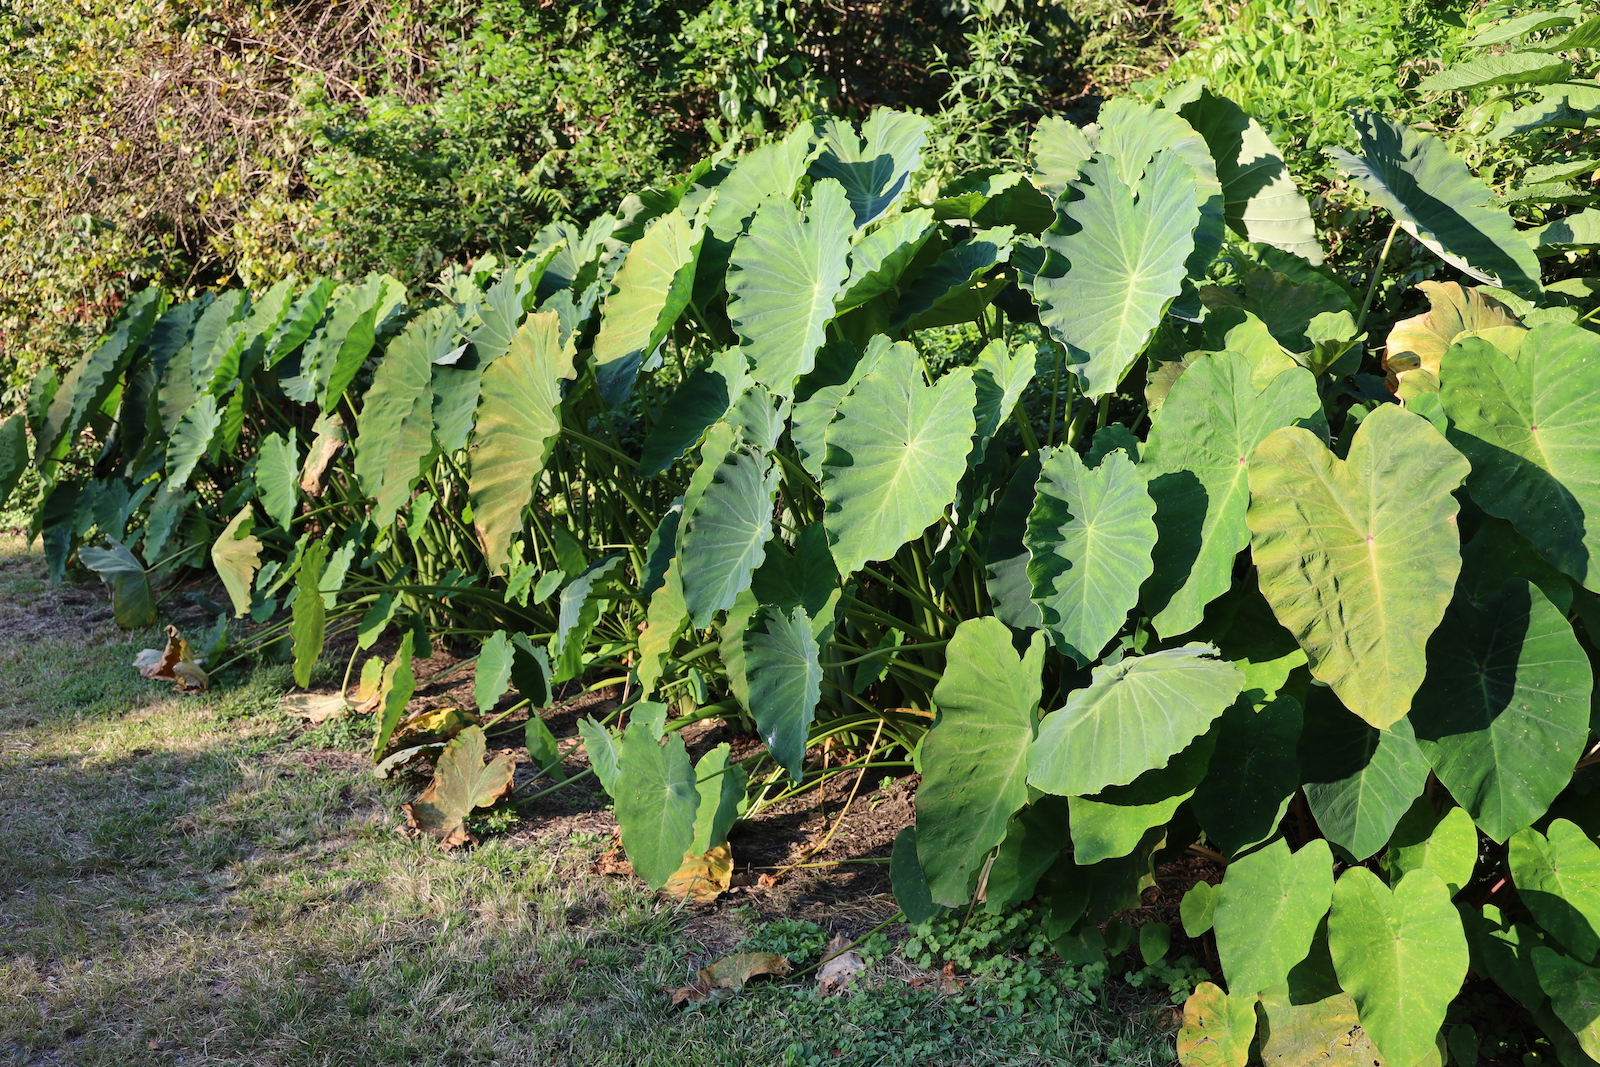 A row of green plants with broad leaves